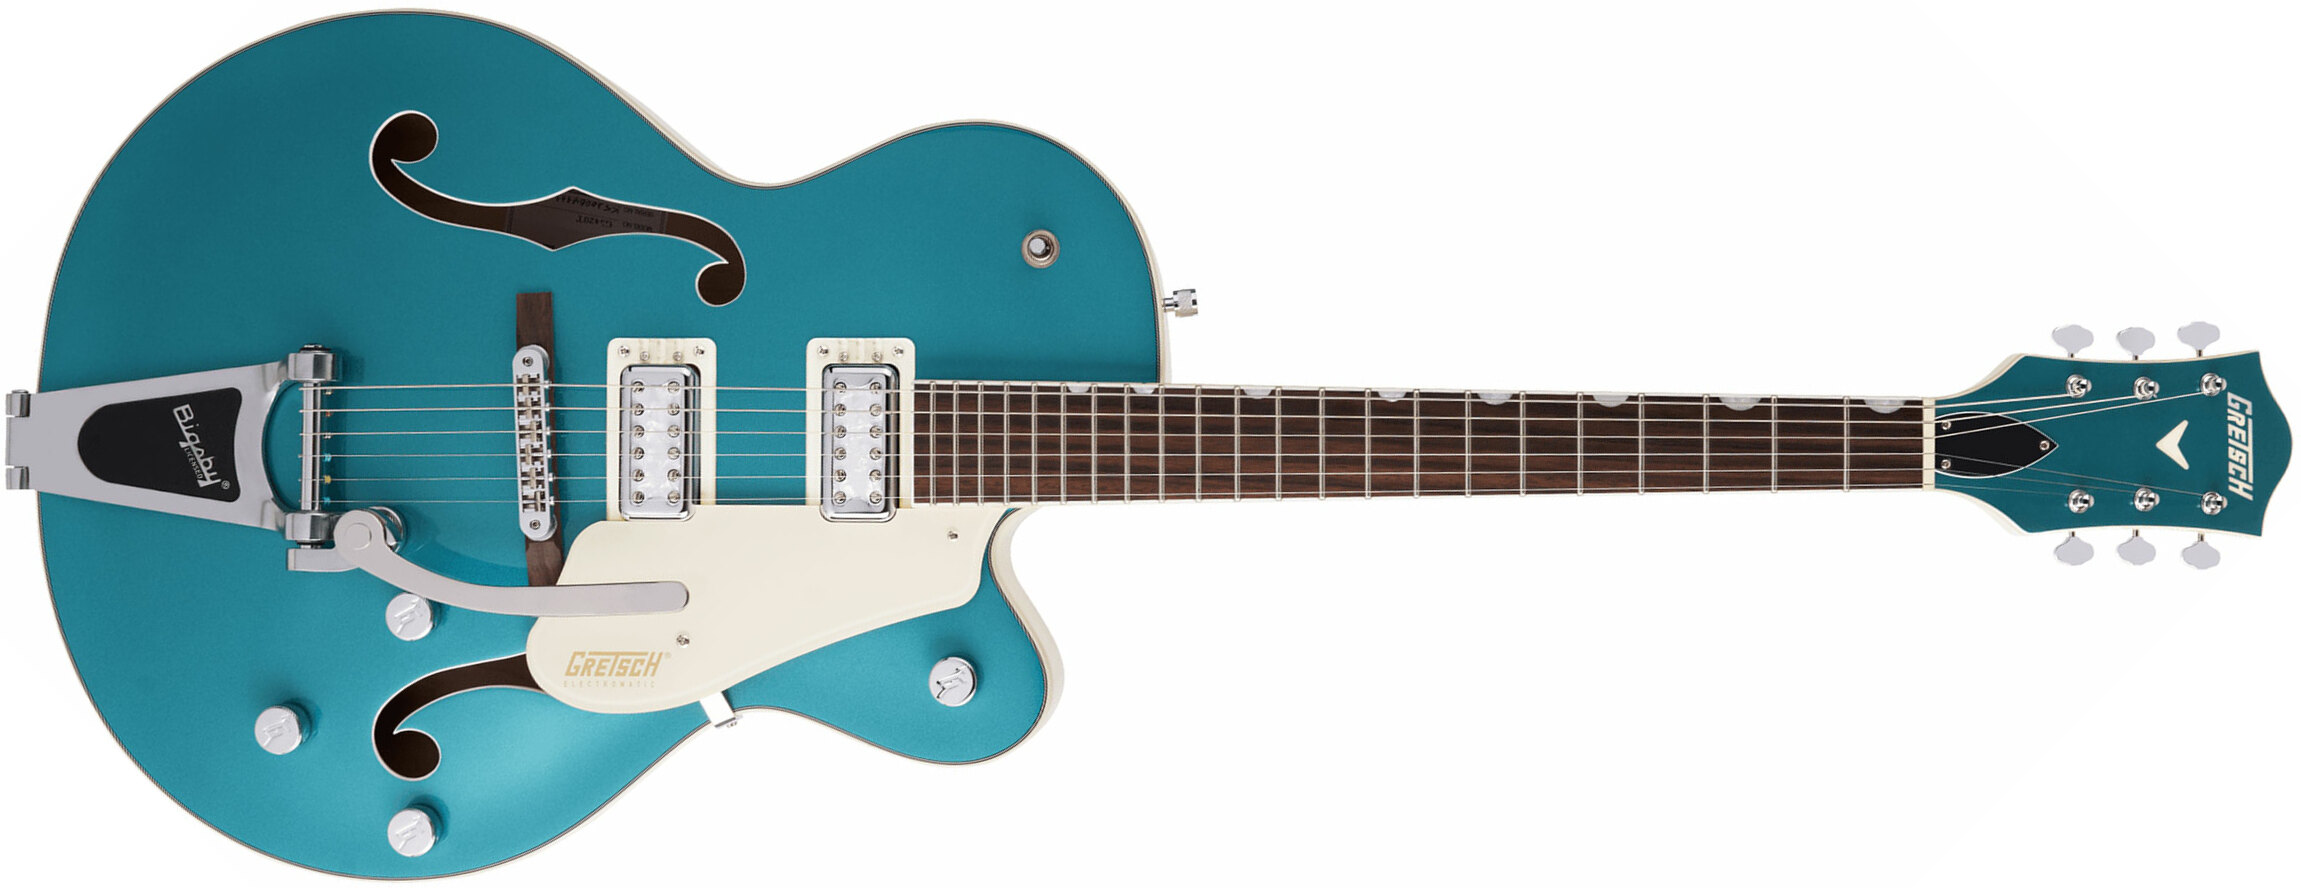 Gretsch G5410t Tri-five Electromatic Hollow Hh Bigsby Rw - Two-tone Ocean Turquoise/vintage White - Guitare Électrique 1/2 Caisse - Main picture